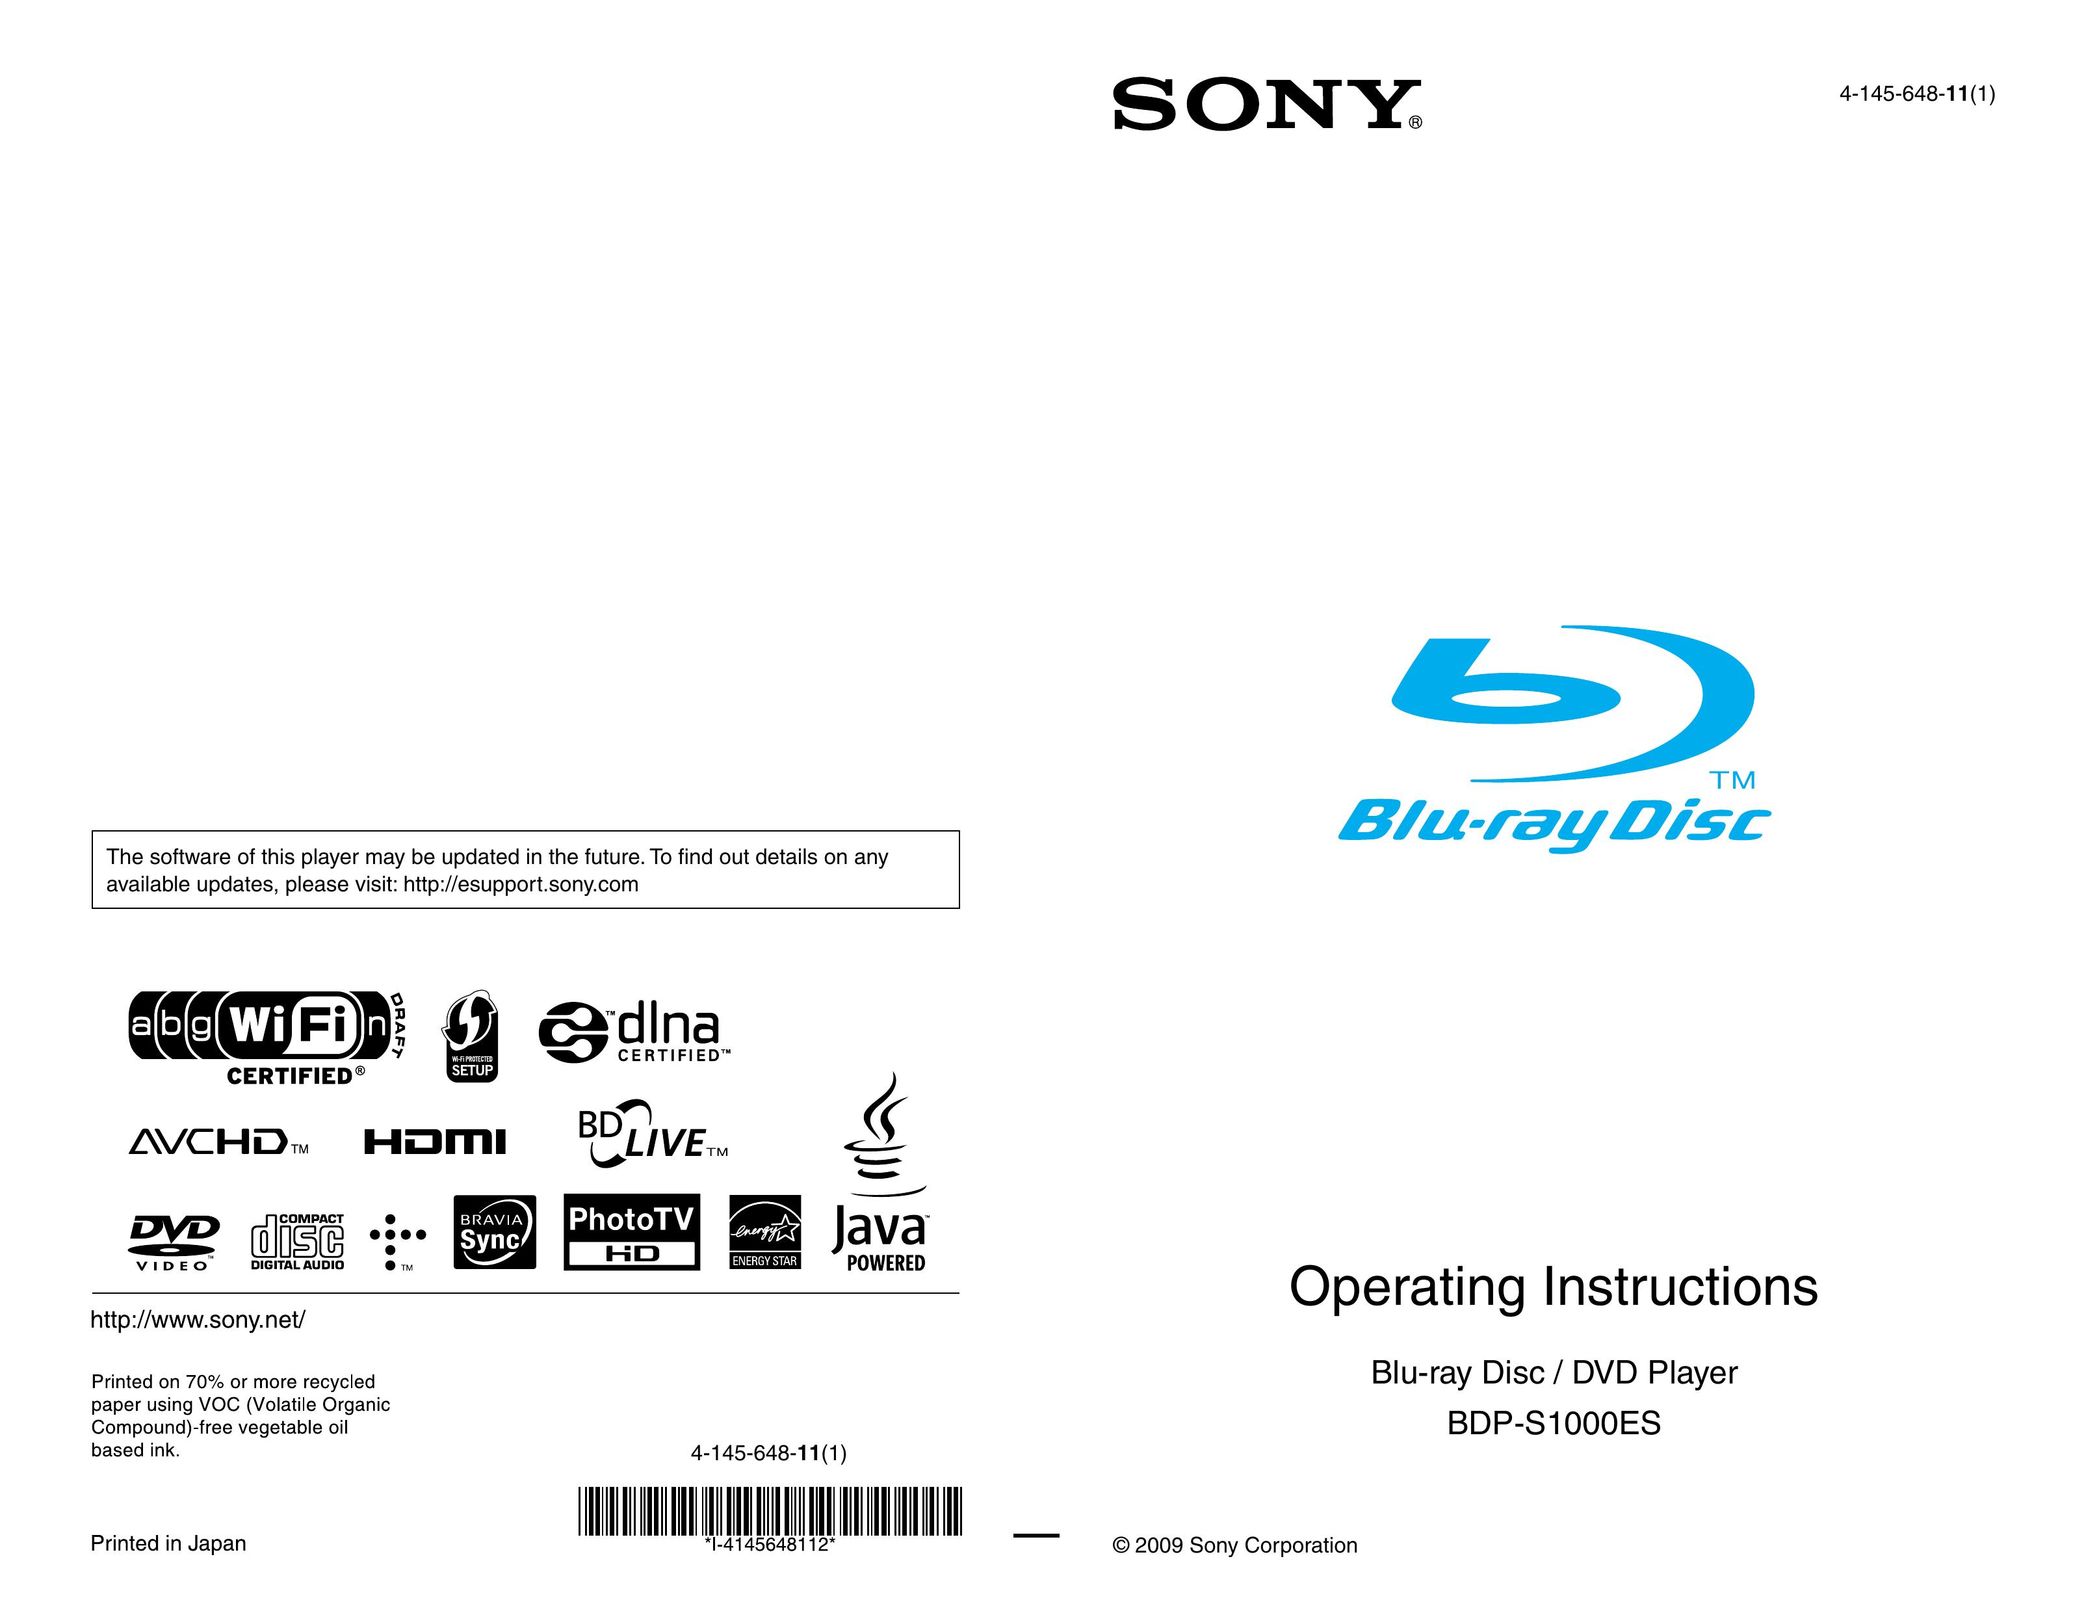 Sony BDP-S1000ES Blu-ray Player User Manual